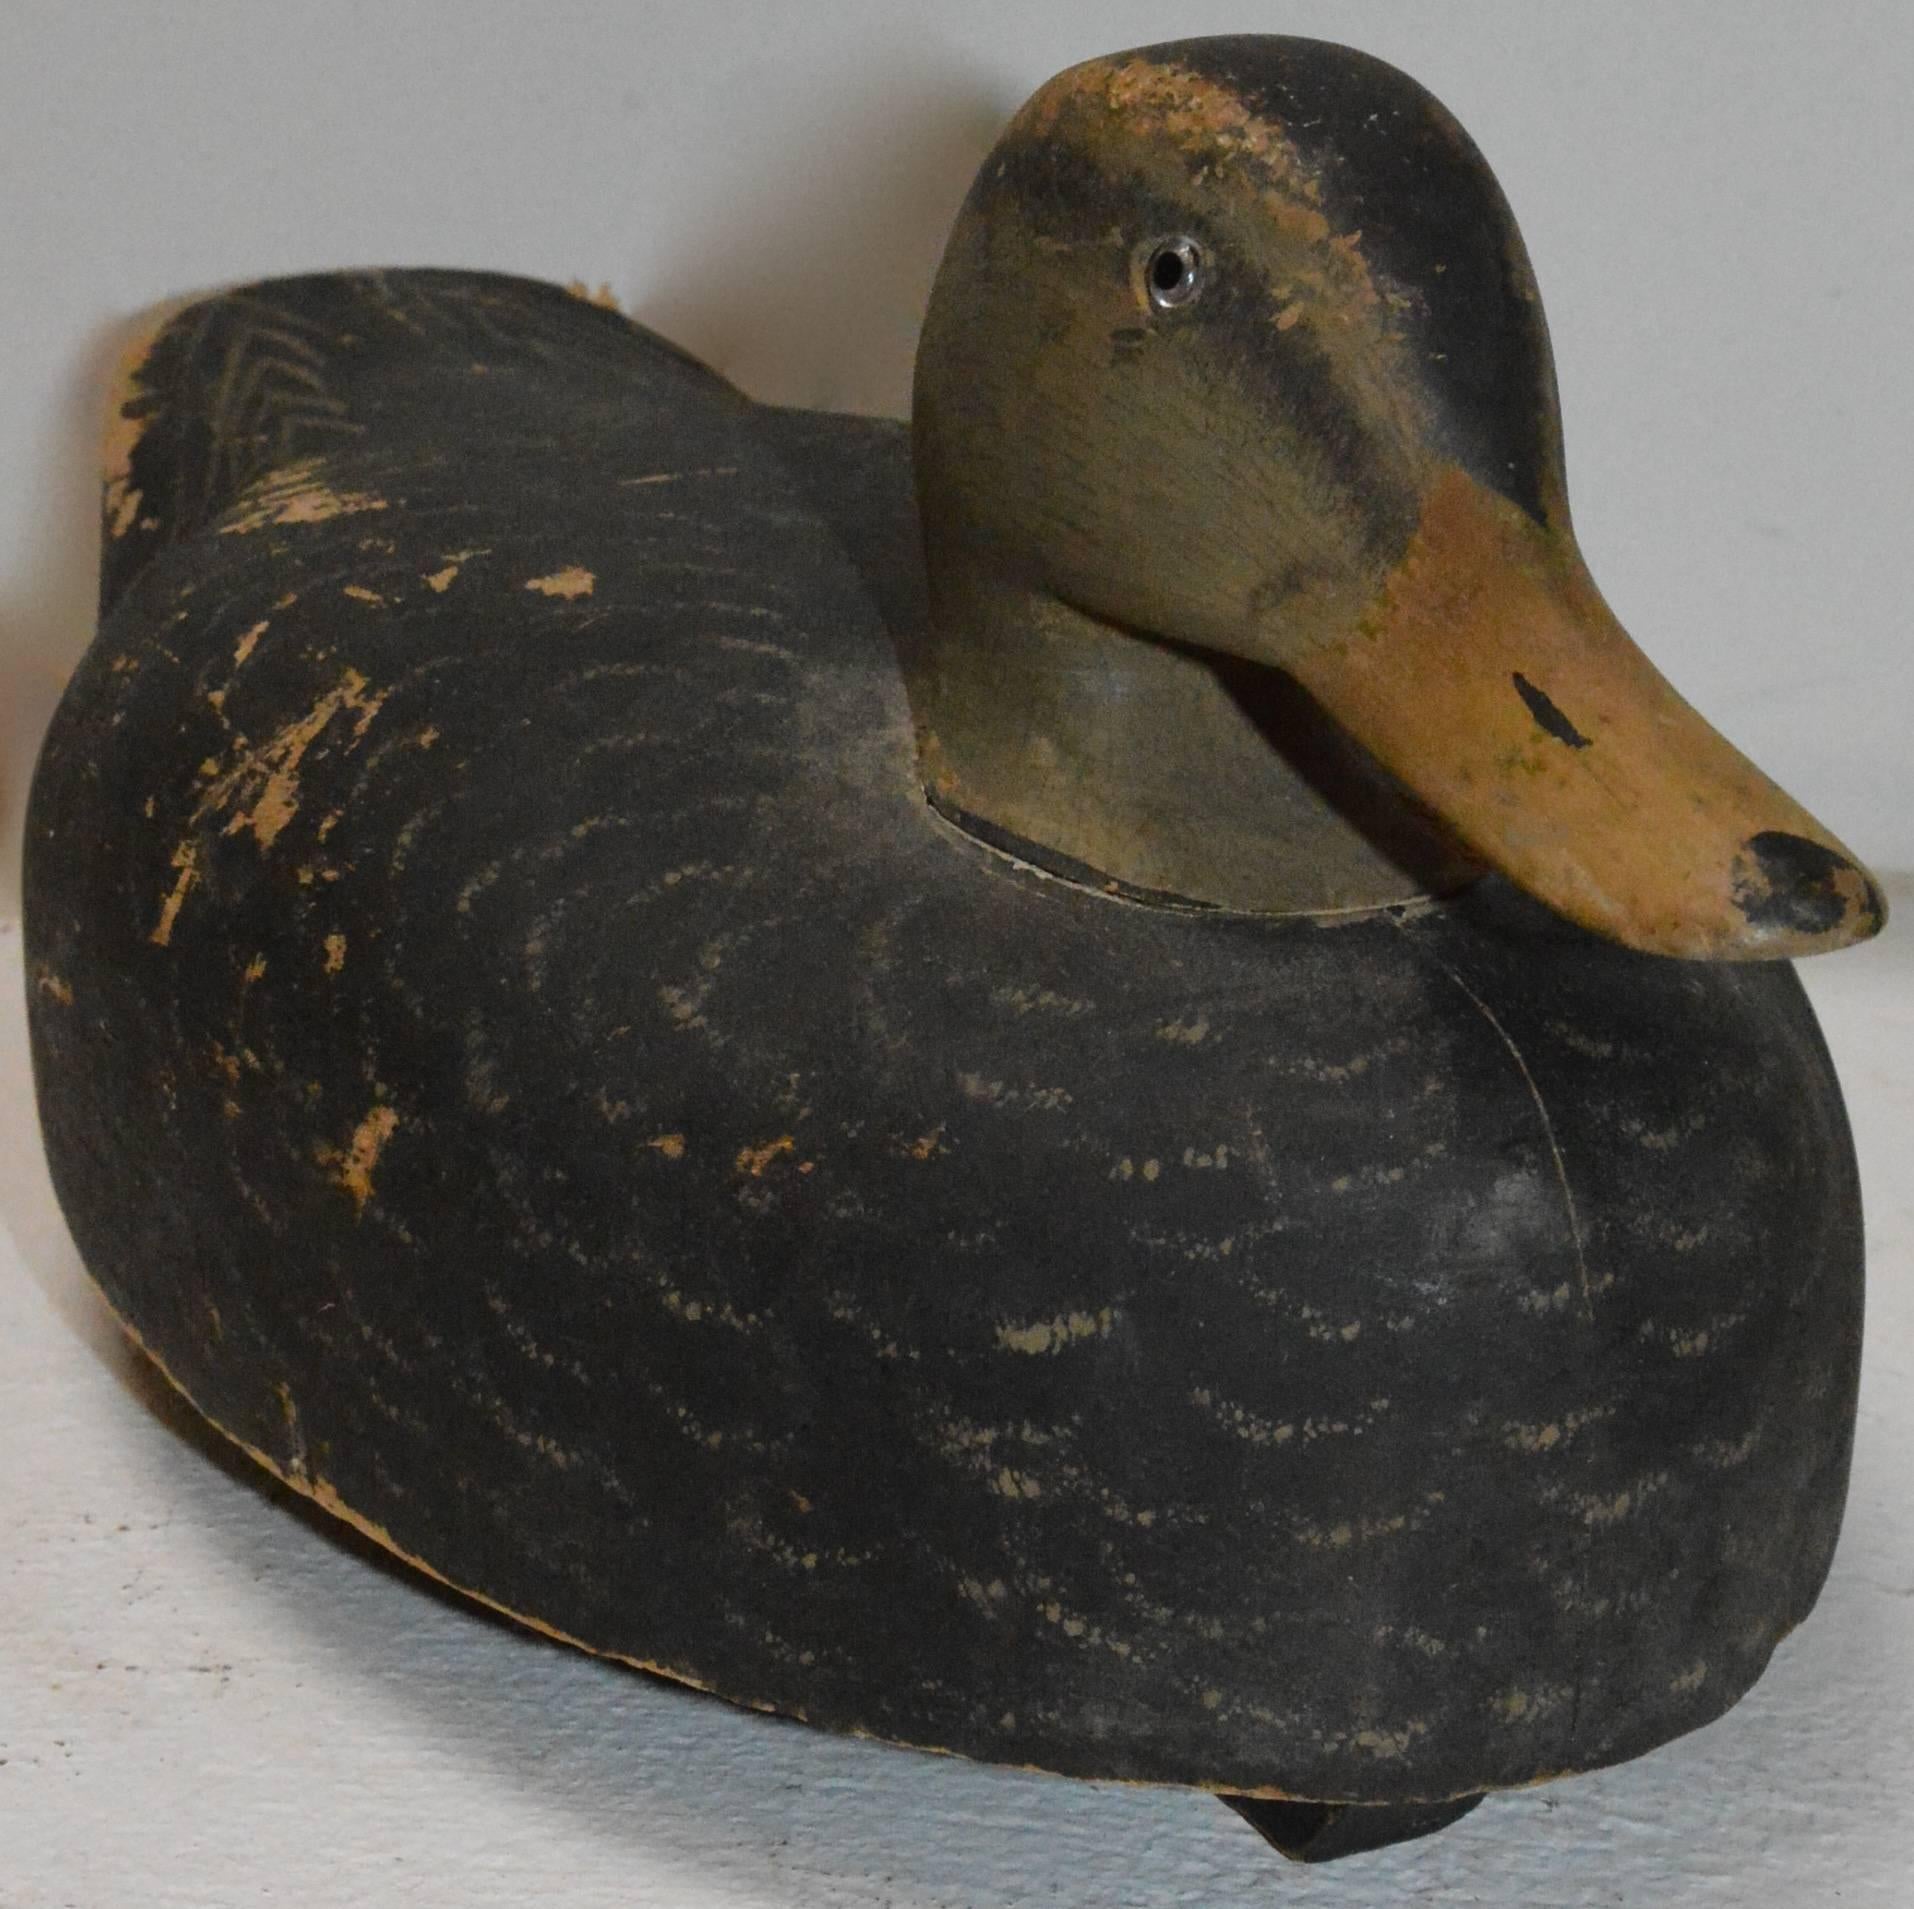 This aged wooden duck decoy is a perfect addition to your garden decor. The duck has distressed black paint on its body with a softer grey on its head. The decoy comes with the weight which is not attached. It has a strip of wood on the bottom of